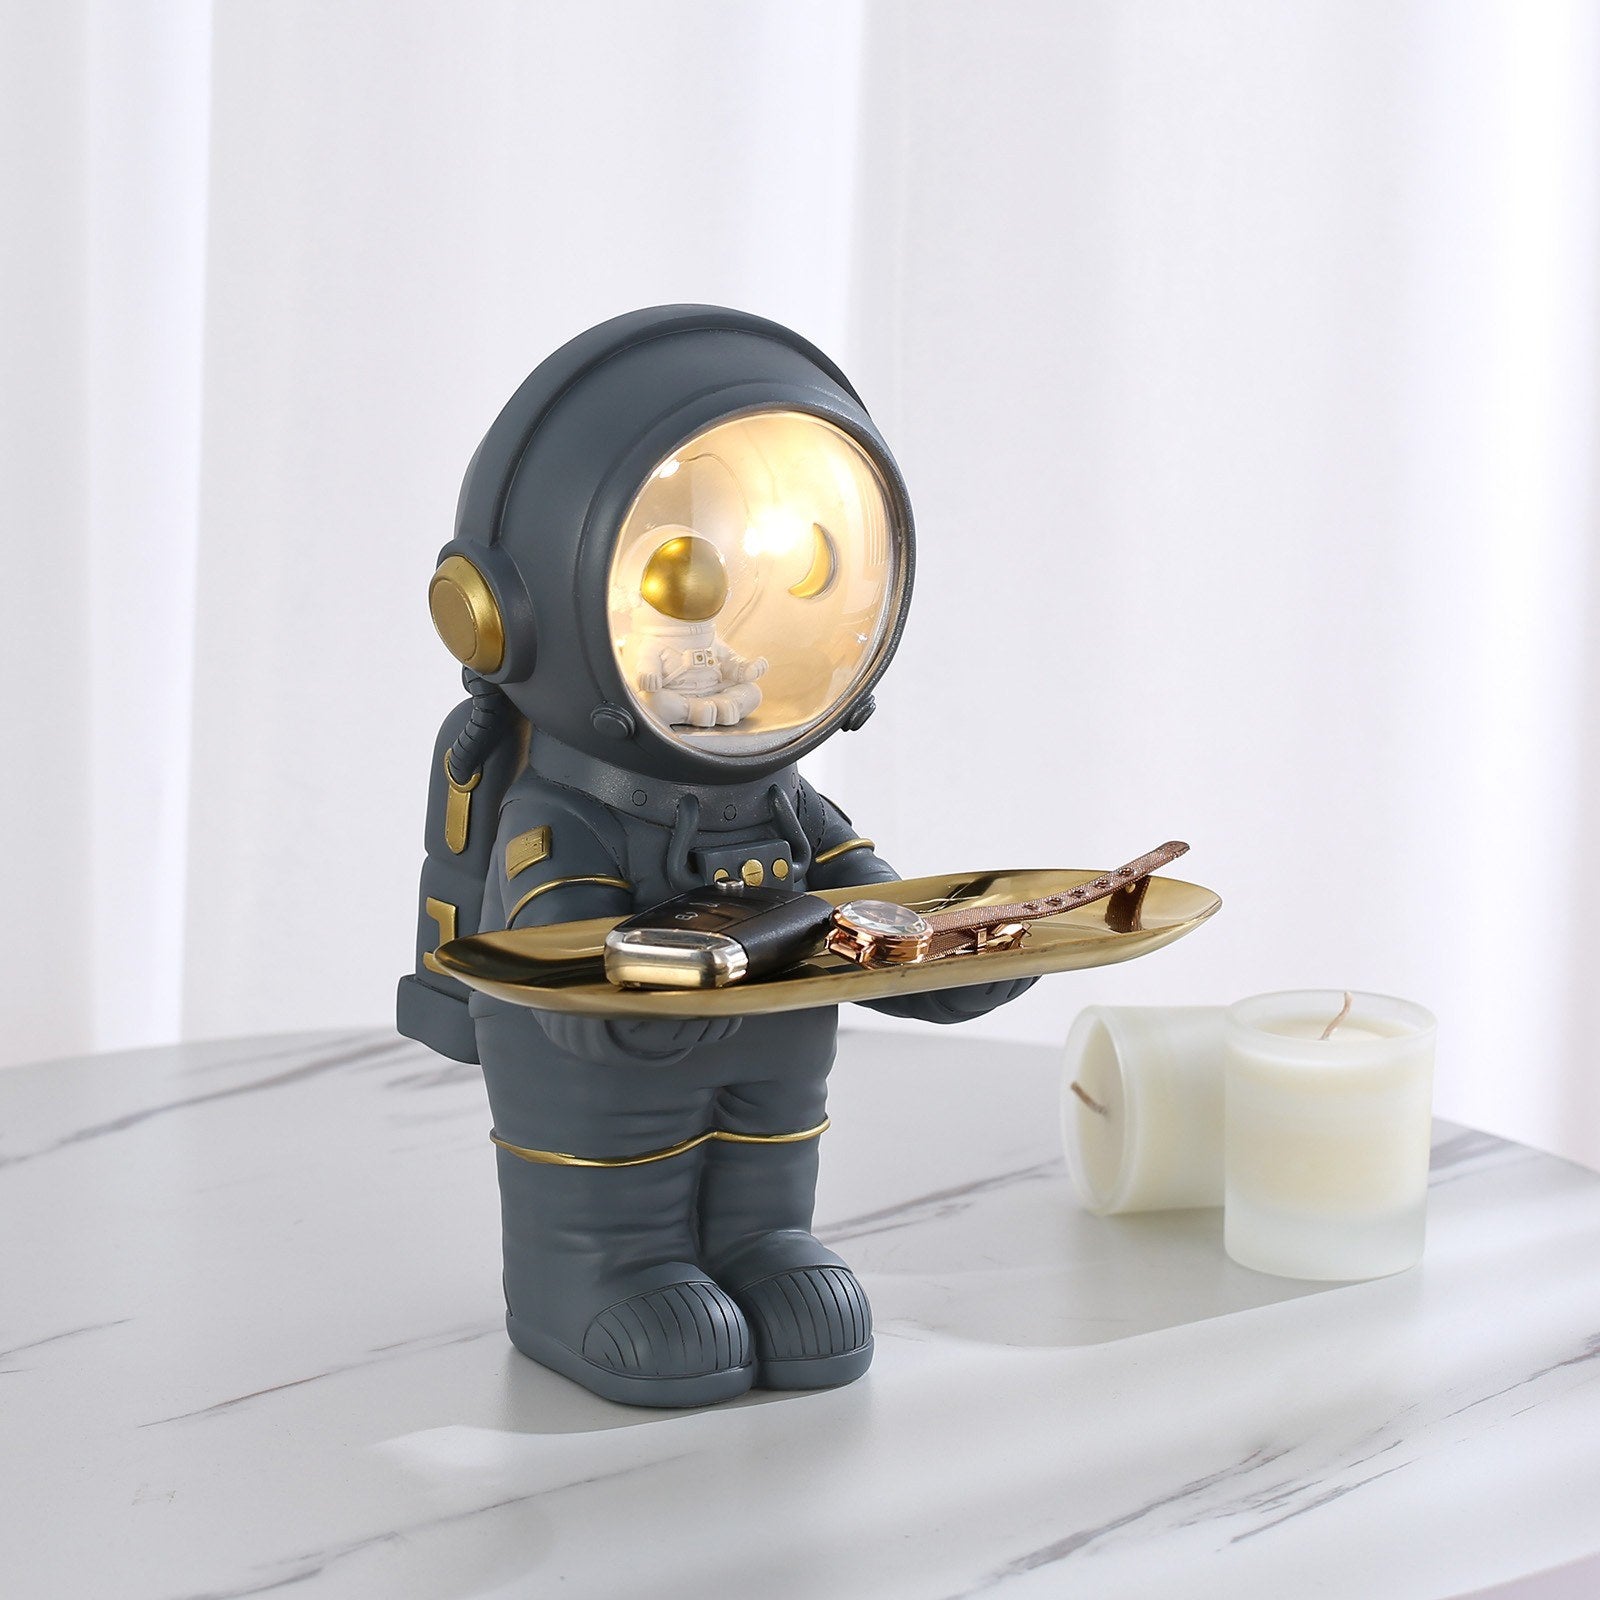 Get inspired and motivated to pursue your dreams with our latest addition to our collection: the Astronaut figurine